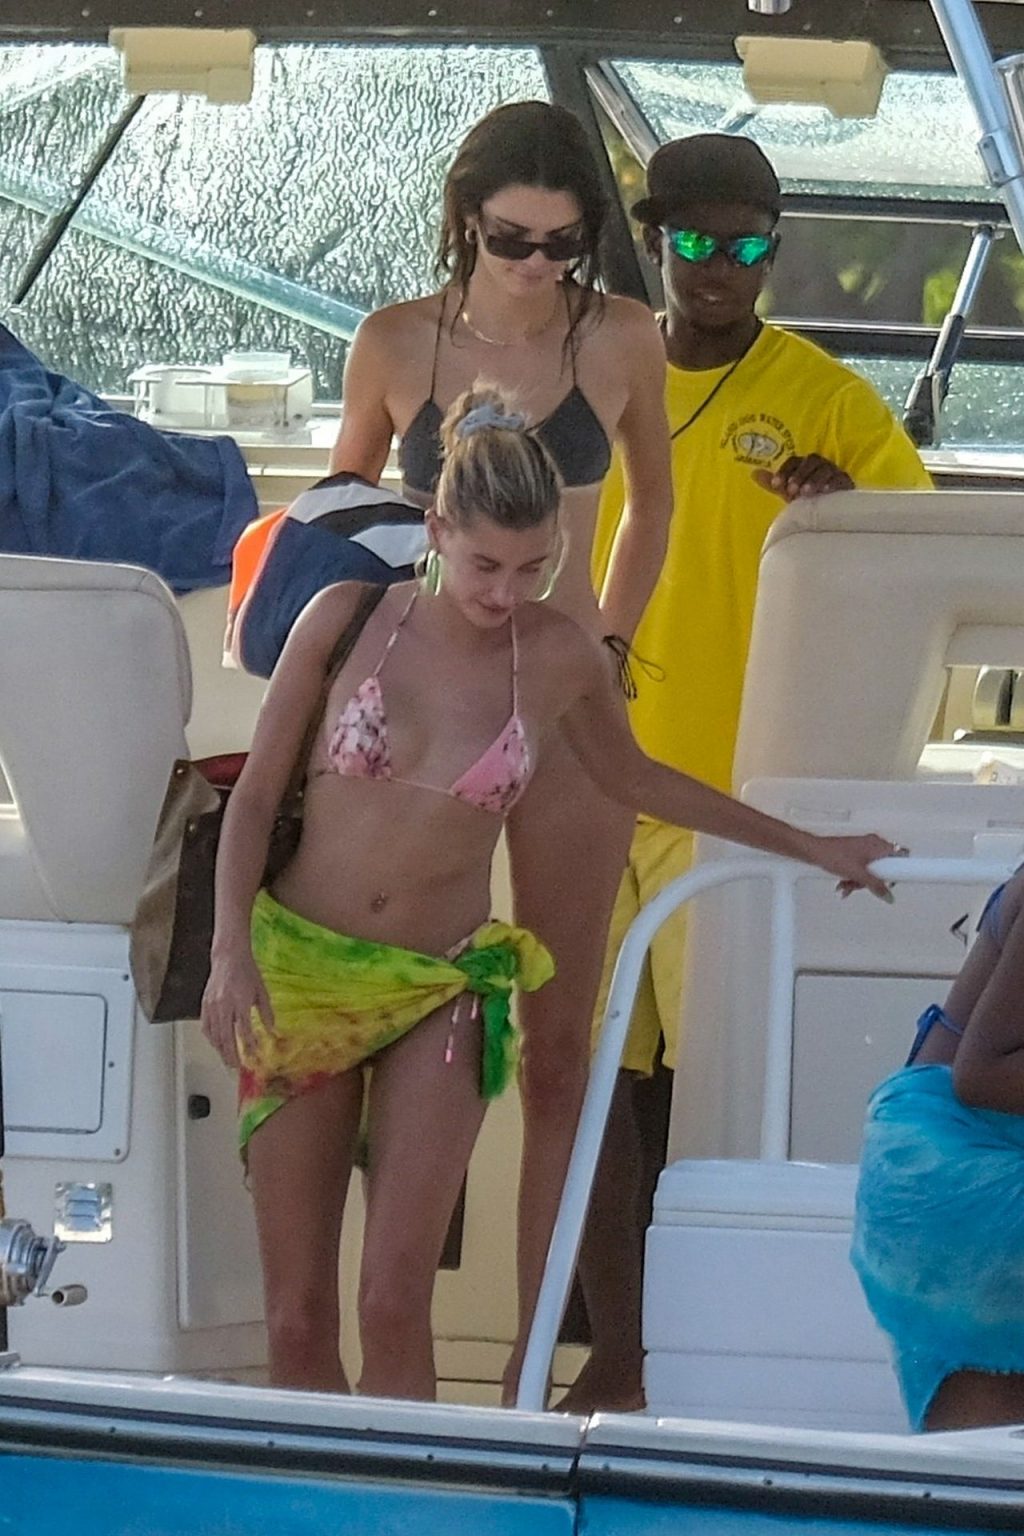 Kendall Jenner and Hailey Bieber and Justine Skye â€“ On a boat in Jamaica